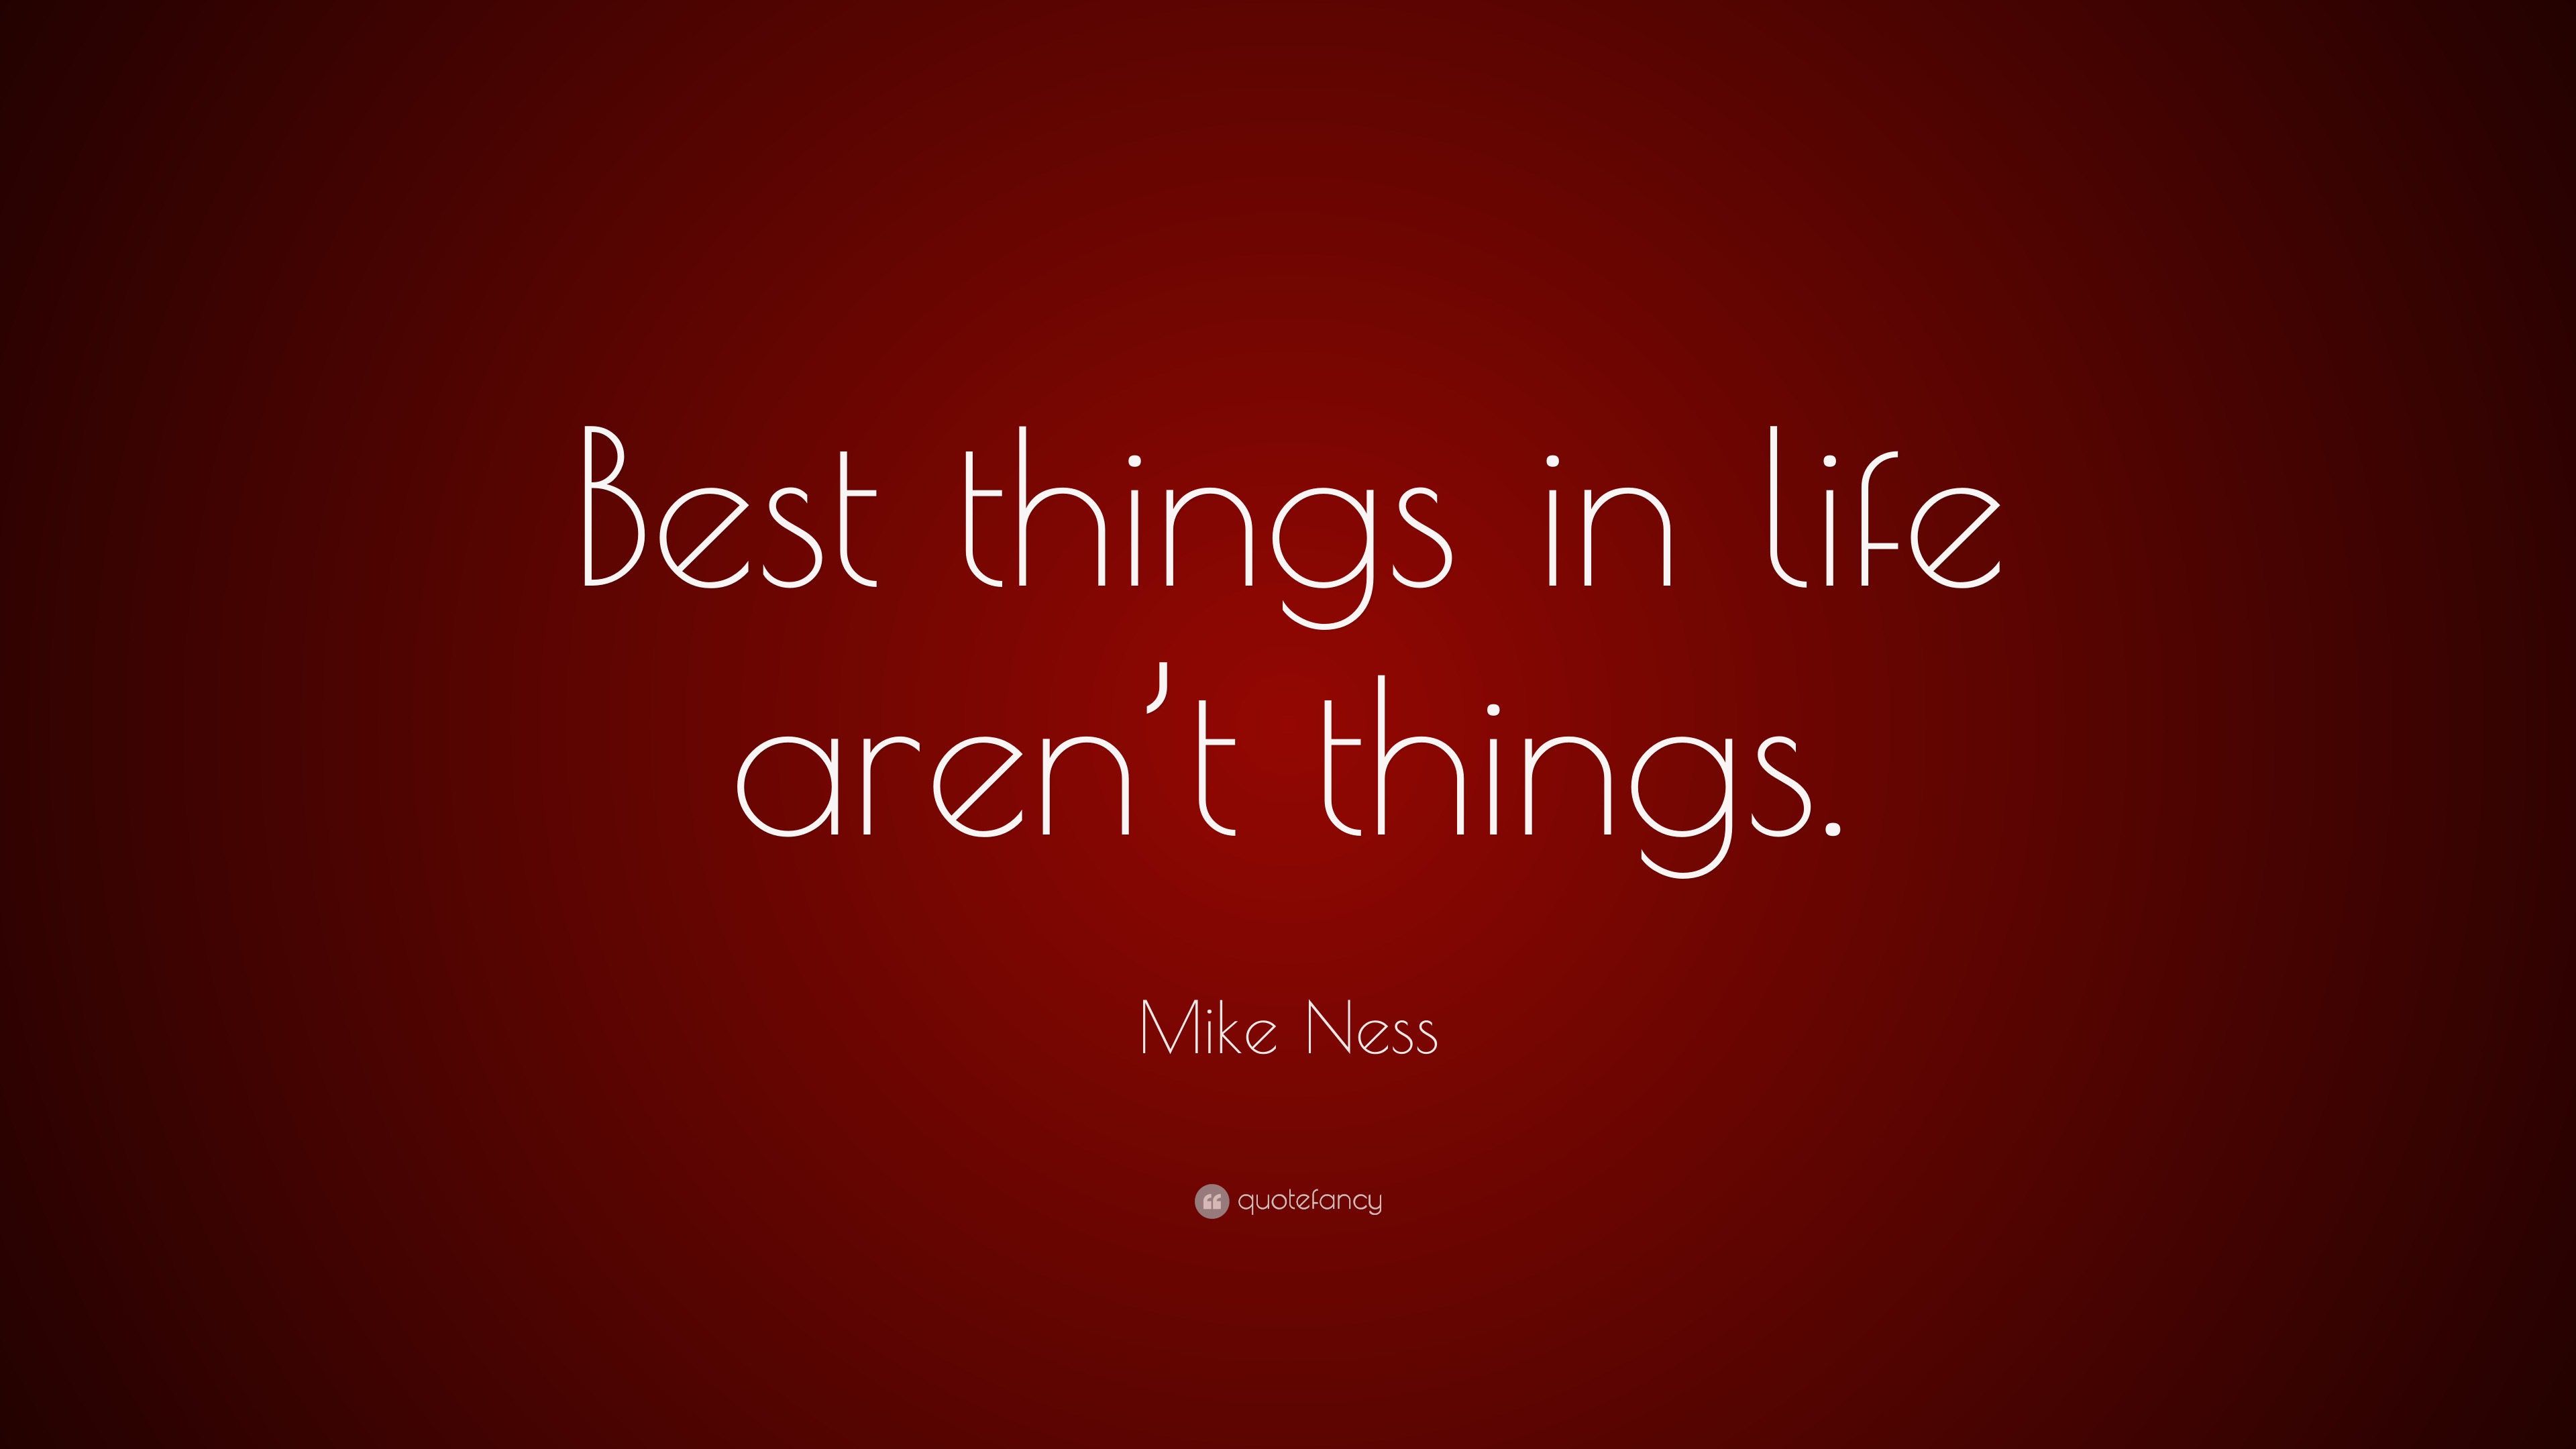 mike ness quote ucbest things in life arenut thingsud with the best things in life arent things